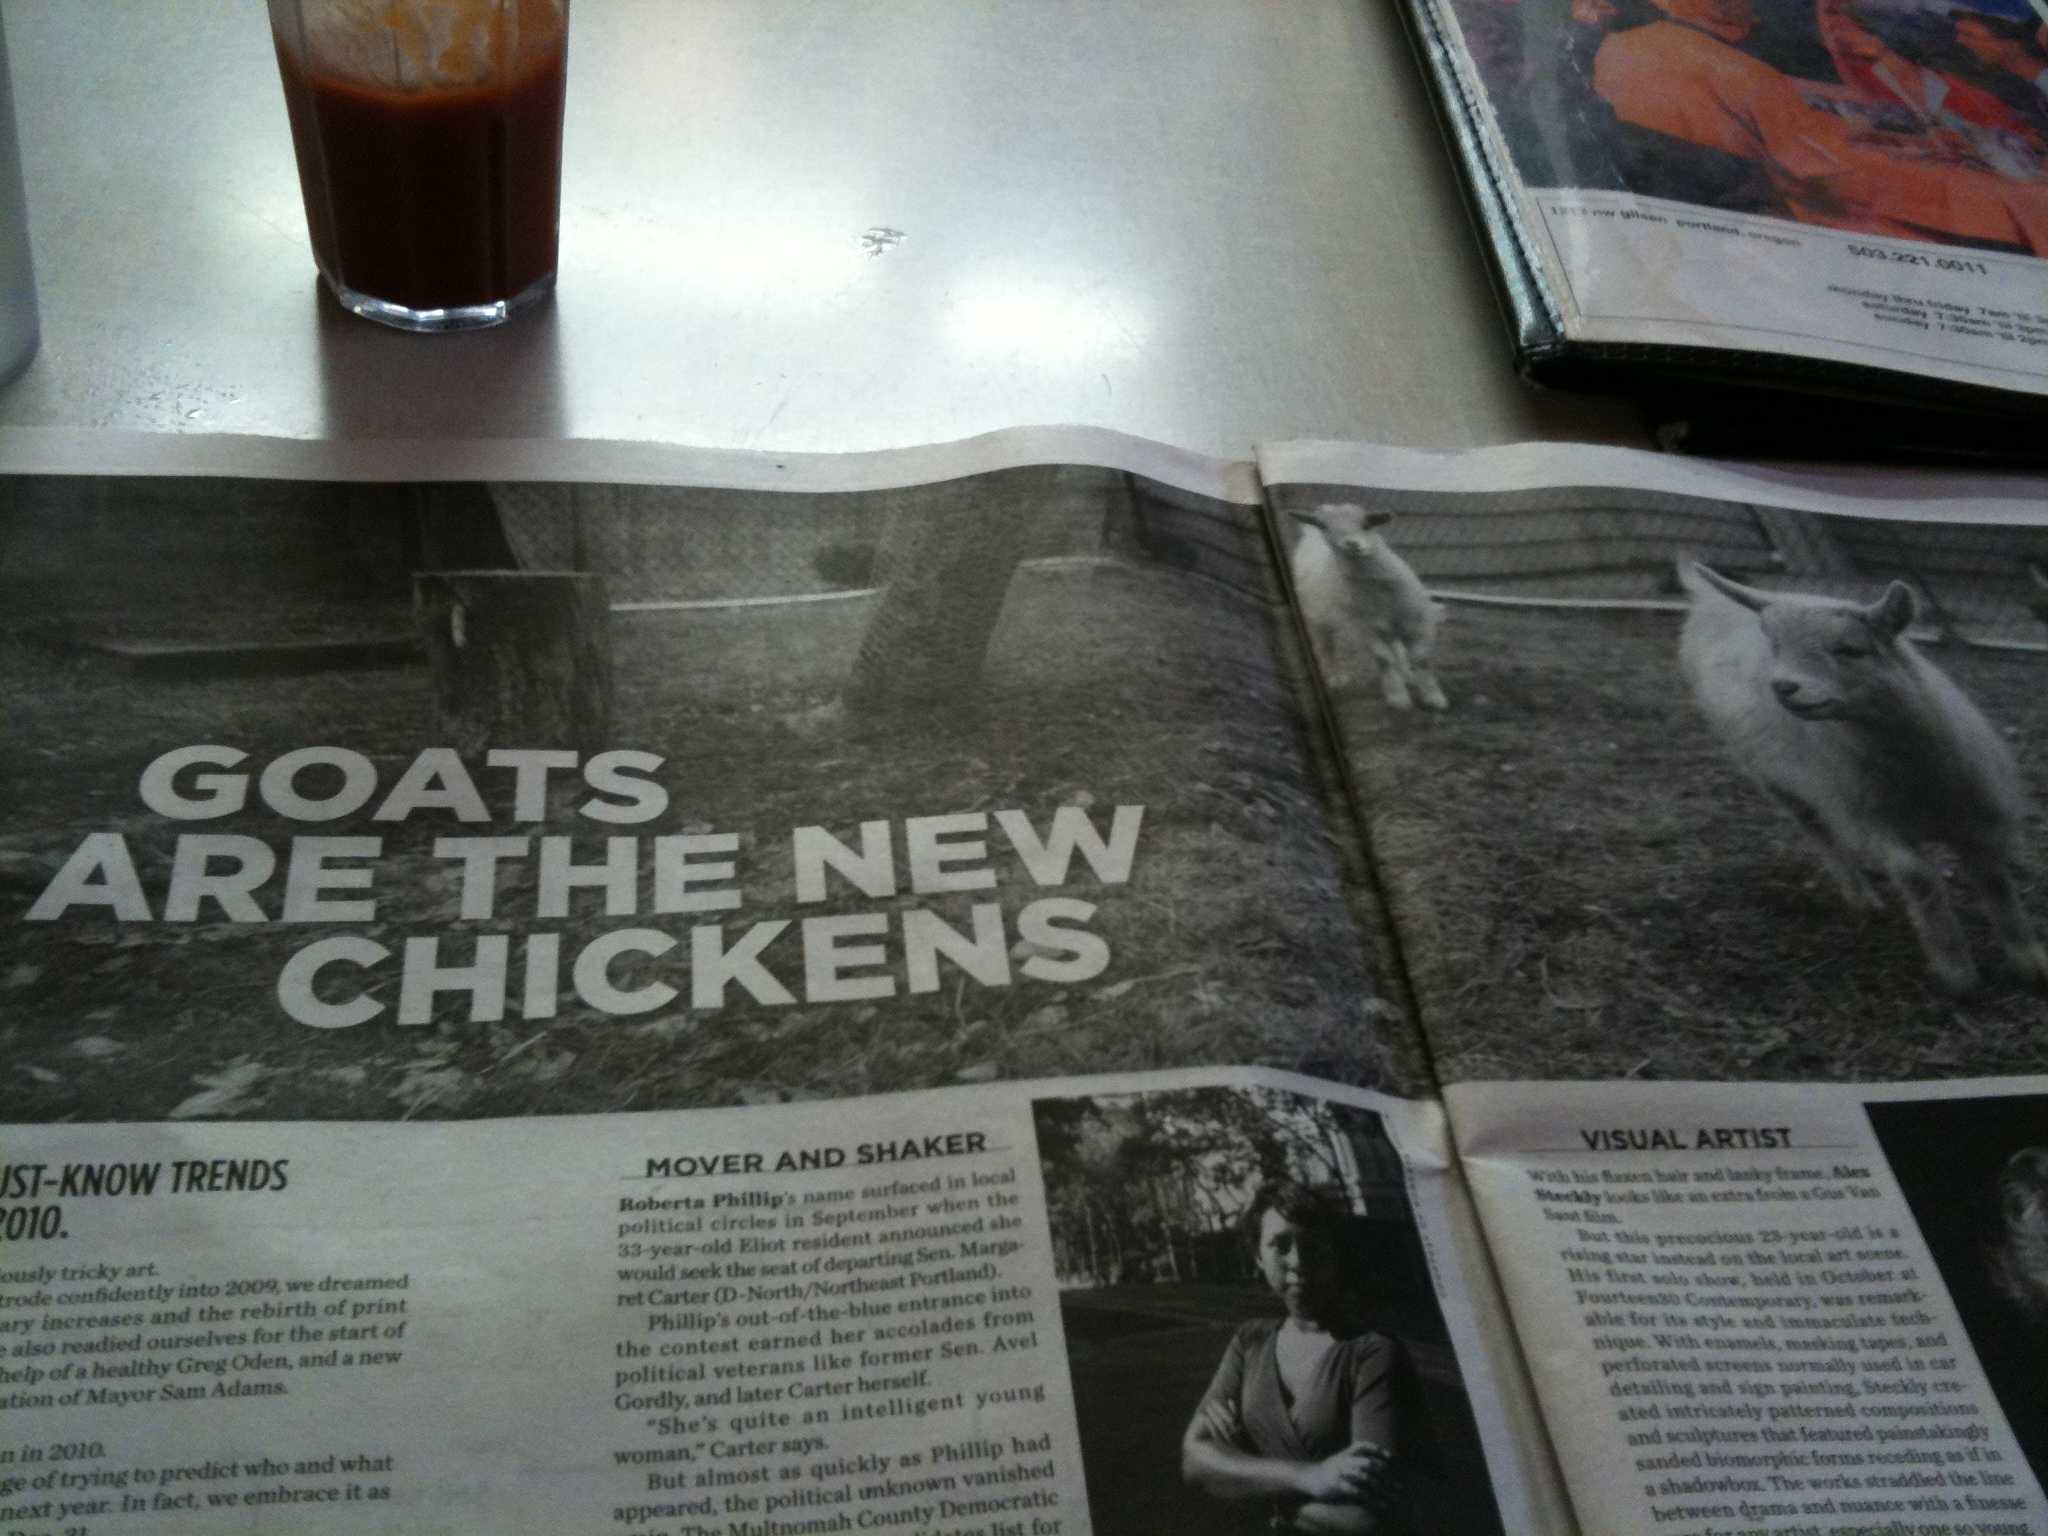 Goats are the New Chickens, headline from 2010